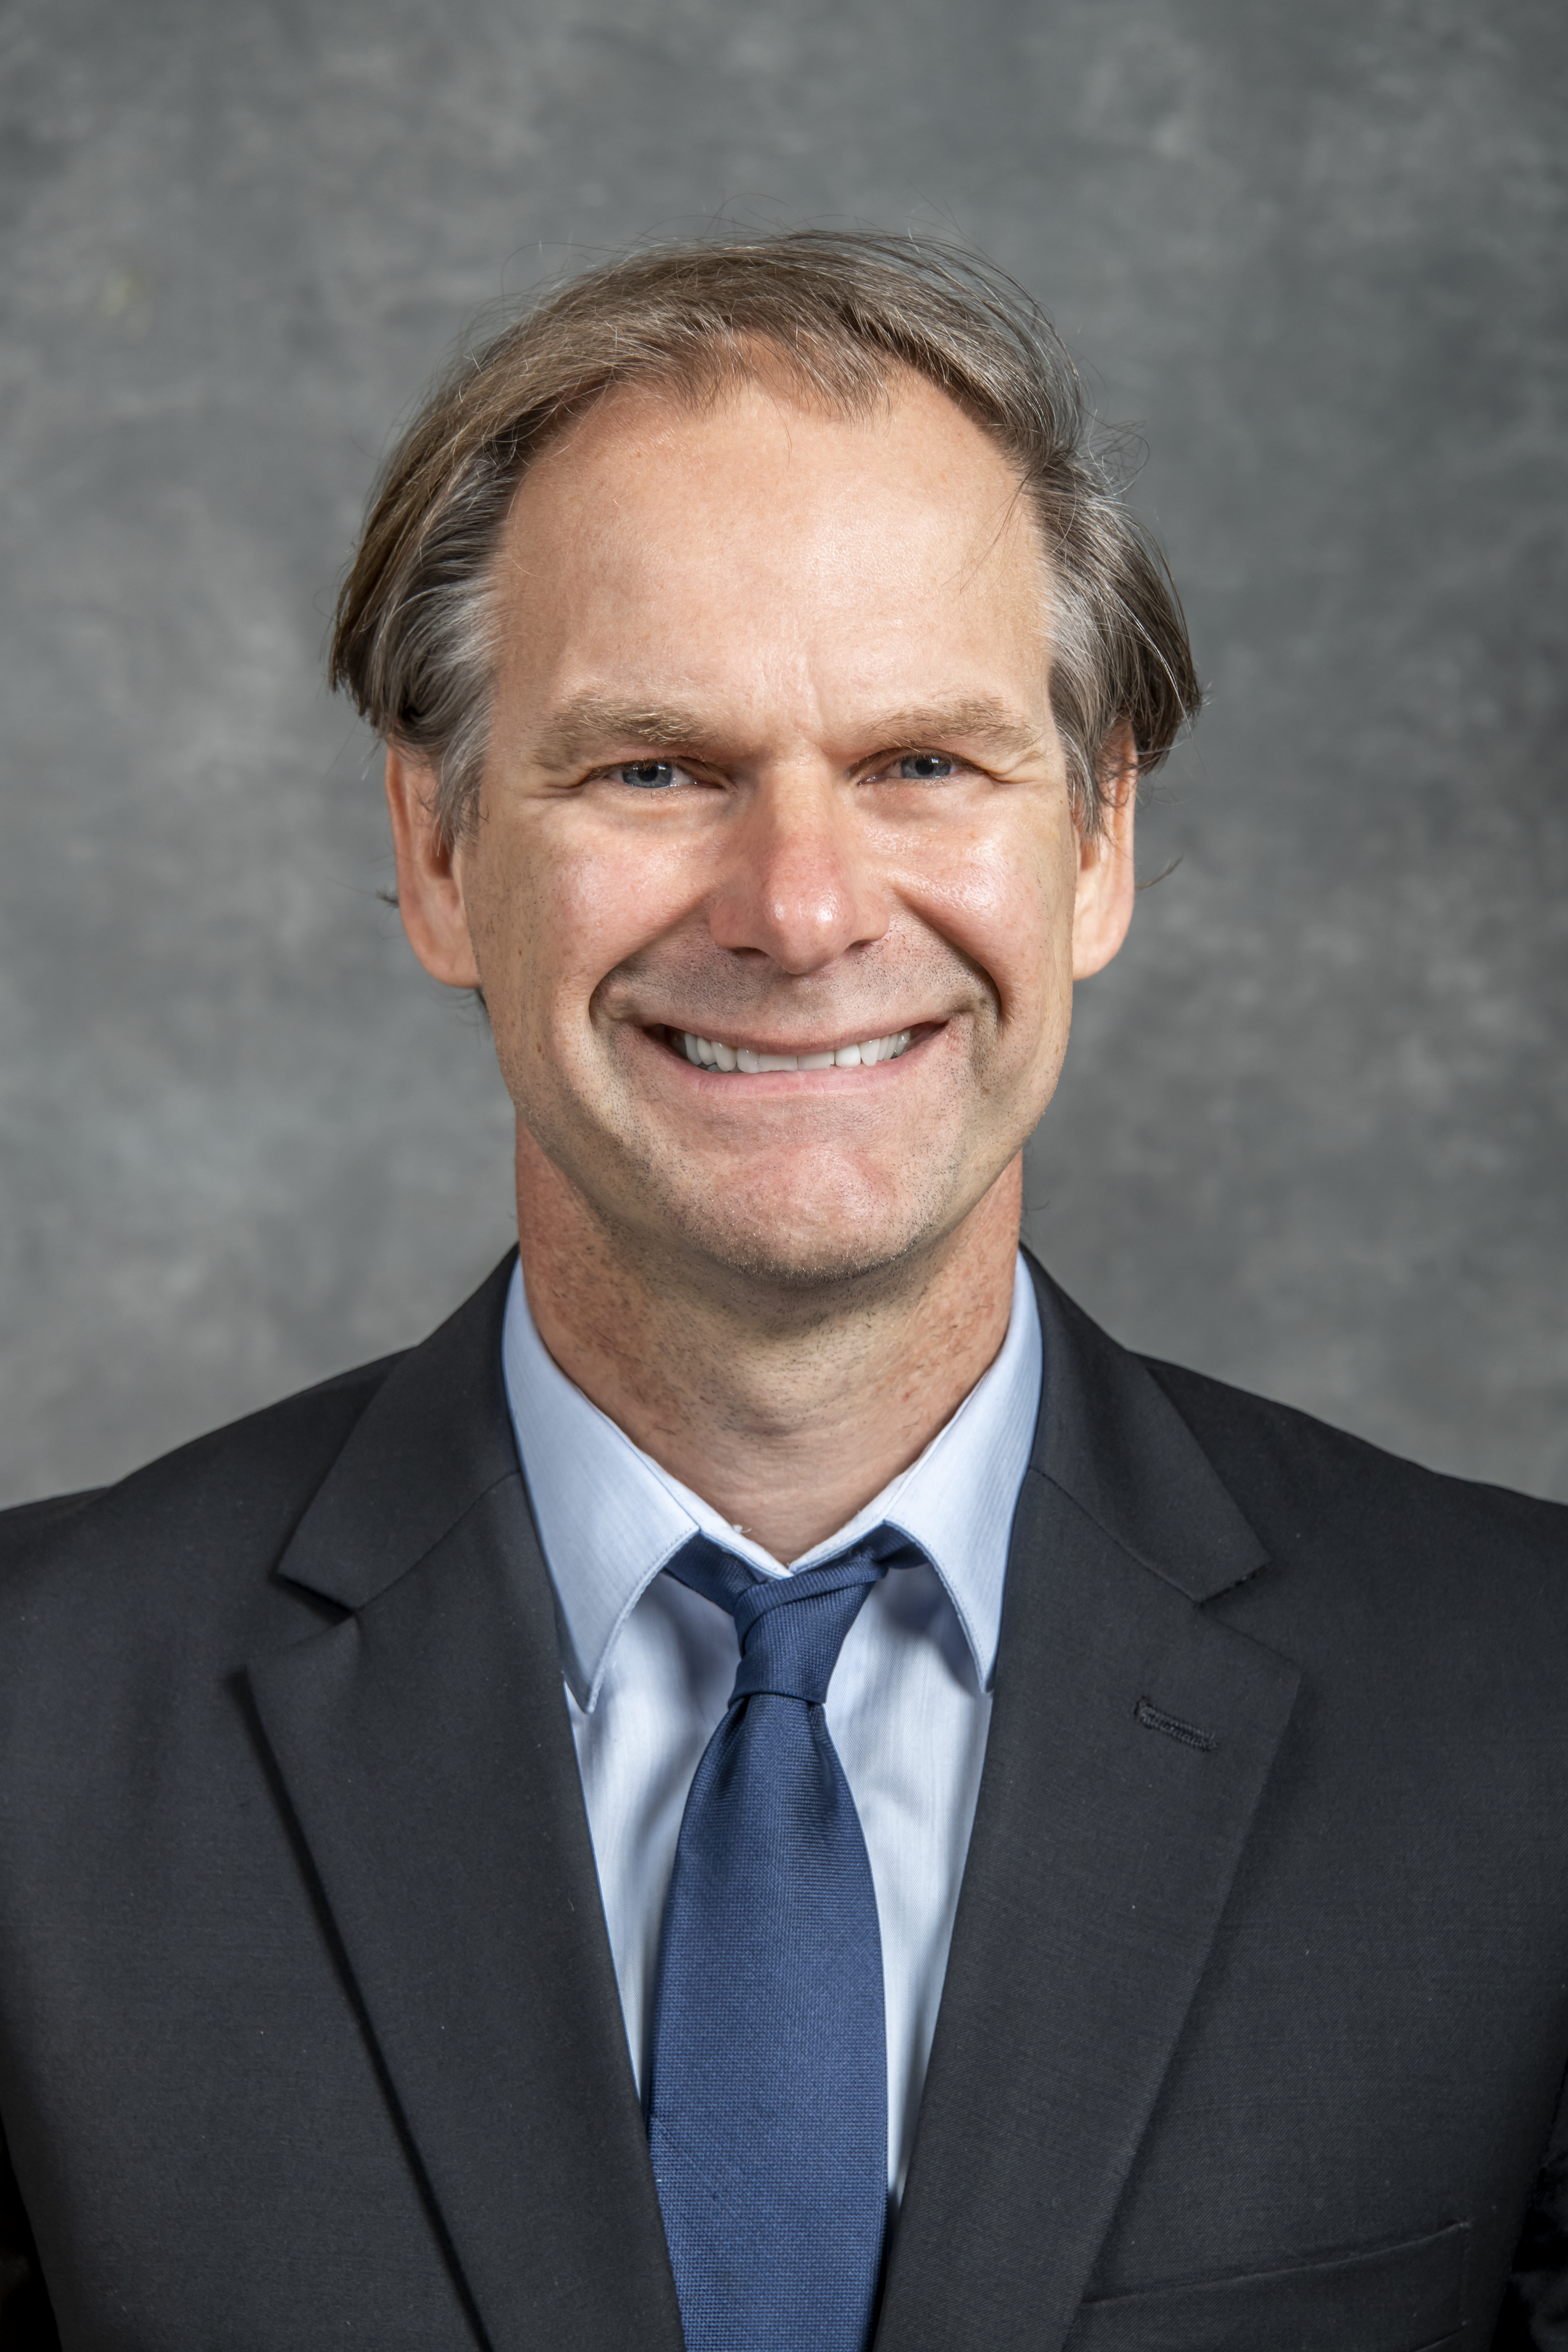 Dr. Thomas Schenkel, Deputy of Technology, ATAP Division, at Lawrence Berkeley National Laboratory on Monday, October 29, 2018 in Berkeley, Calif. 10/29/18